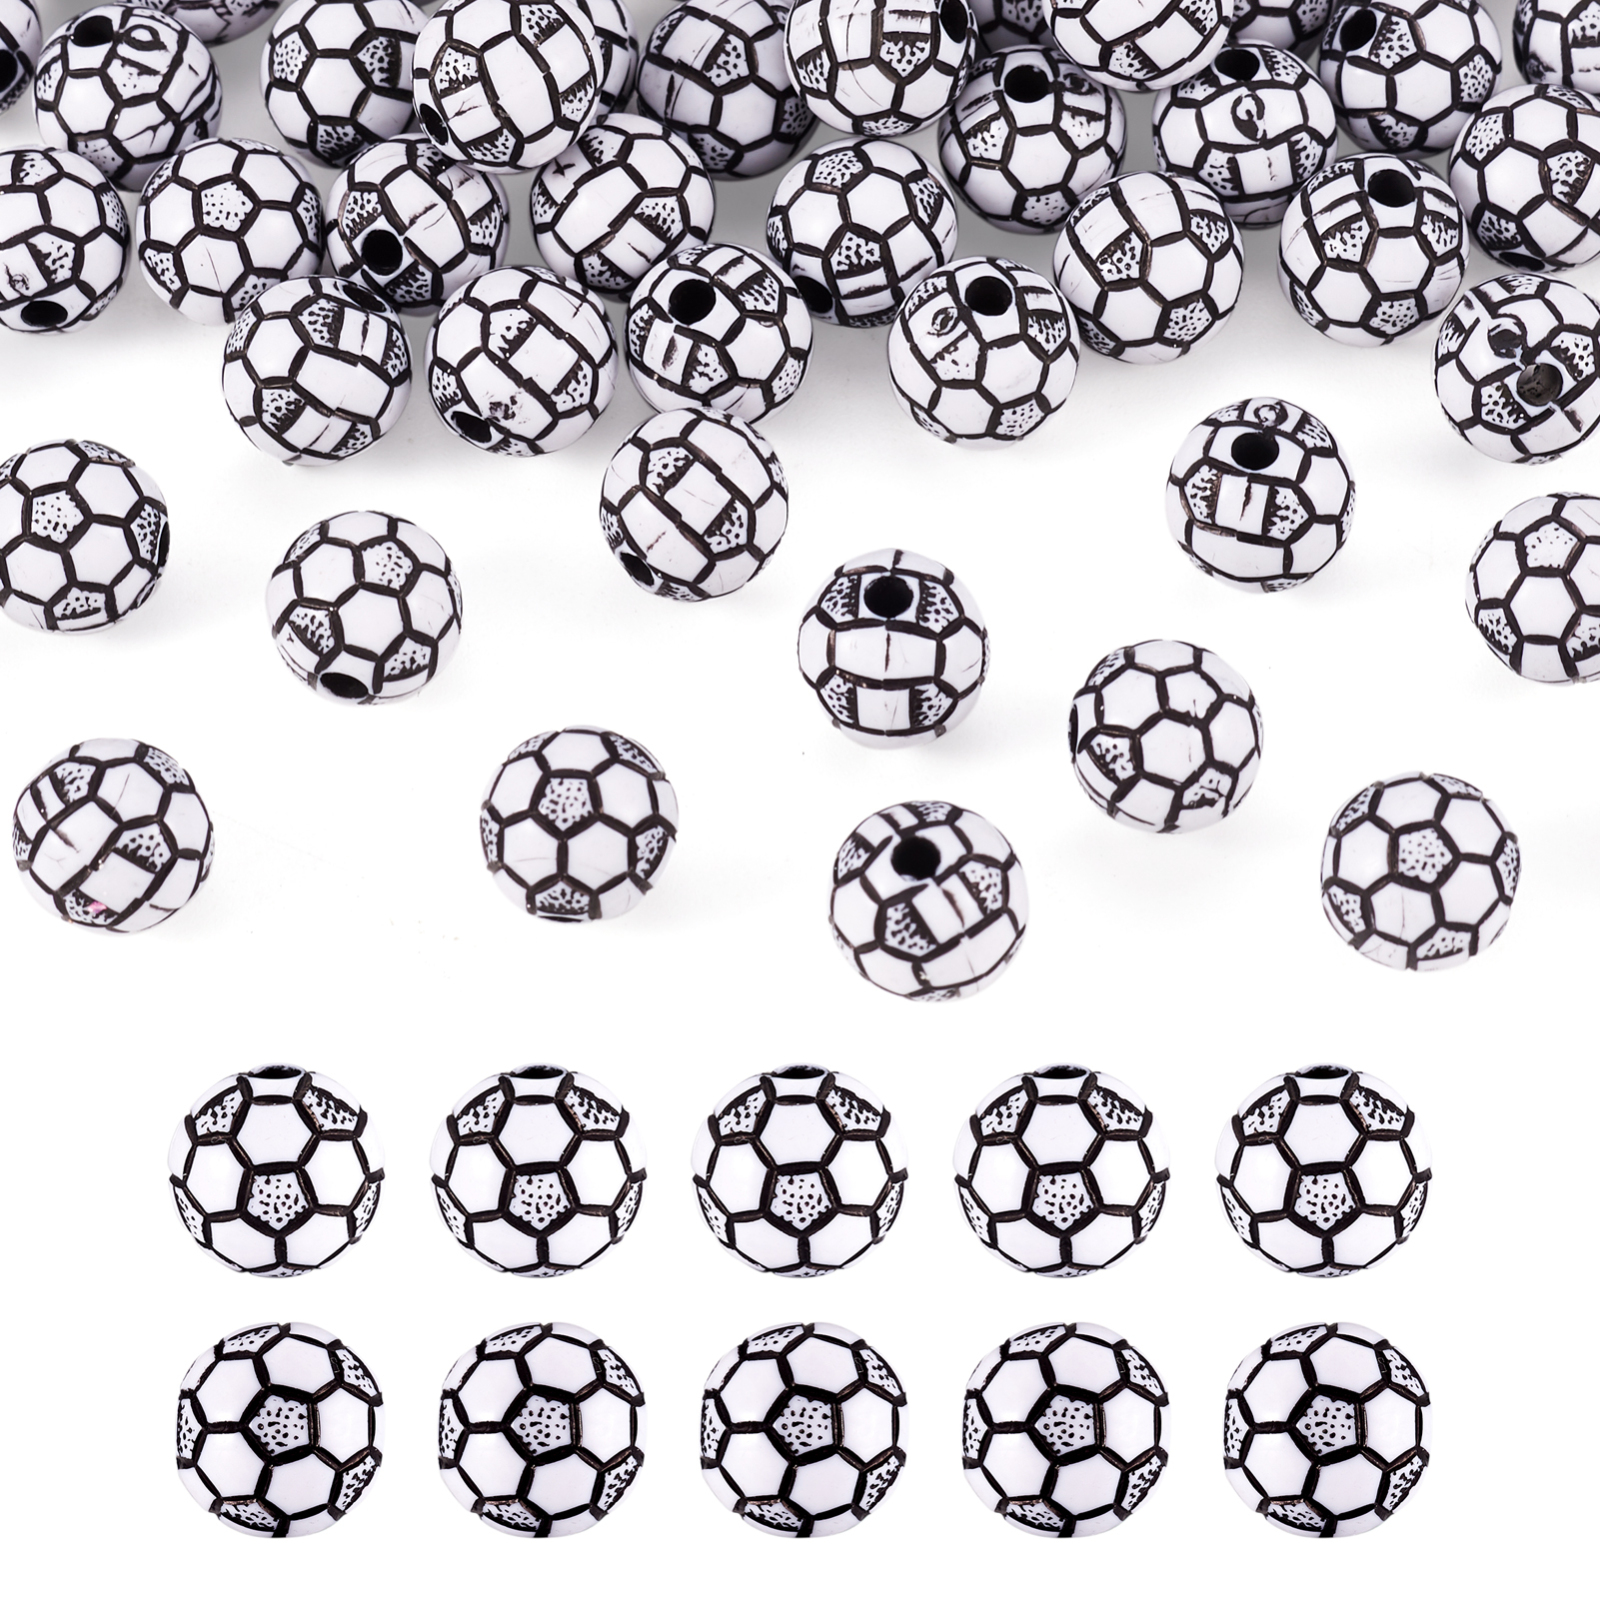  300PCS Sports Beads for Jewelry Making, Polymer Clay Beads with  Baseball, Football, Basketball, Volleyball, Rugby Beads, DIY Crafts Ball  Beads Charms for Bracelets Making Necklace Keychain, 6 Styles